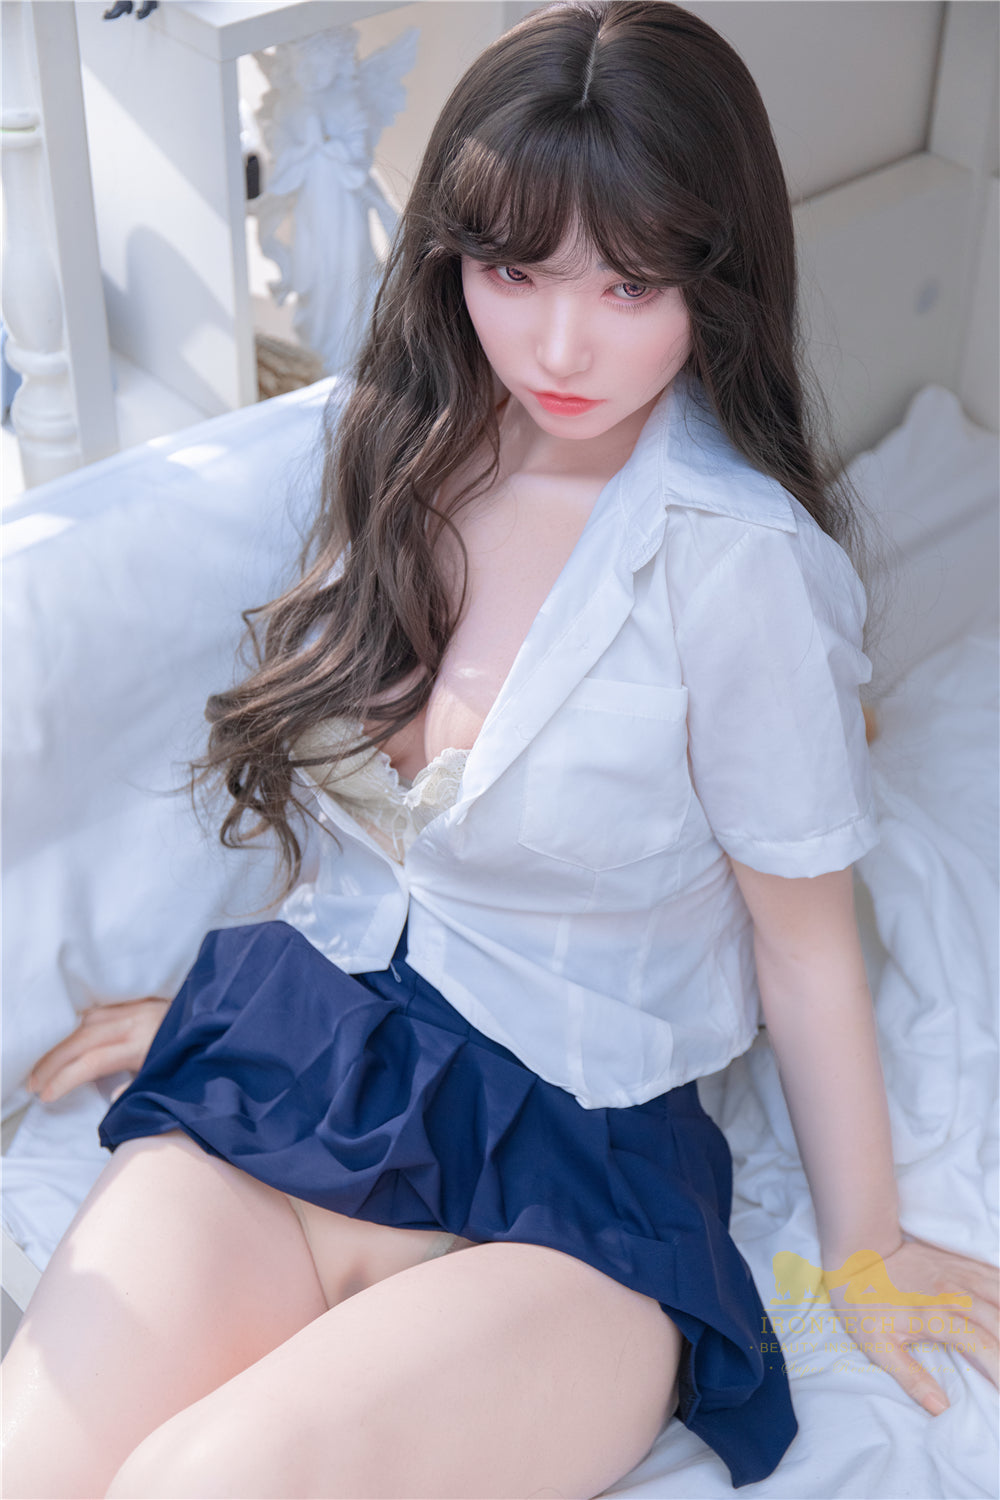 Irontech Doll 168 cm Silicone - Suki | Buy Sex Dolls at DOLLS ACTUALLY